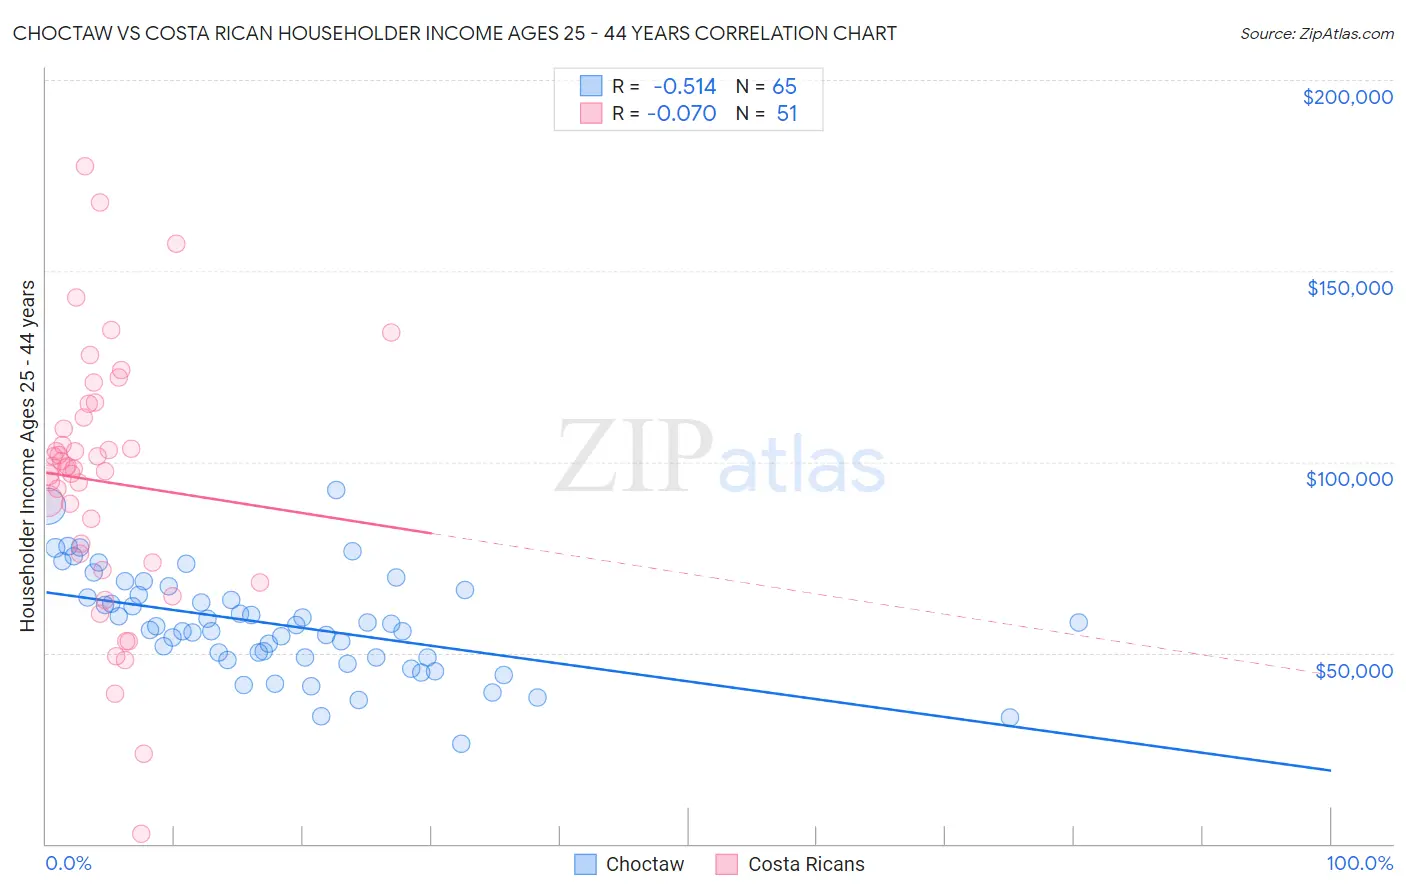 Choctaw vs Costa Rican Householder Income Ages 25 - 44 years